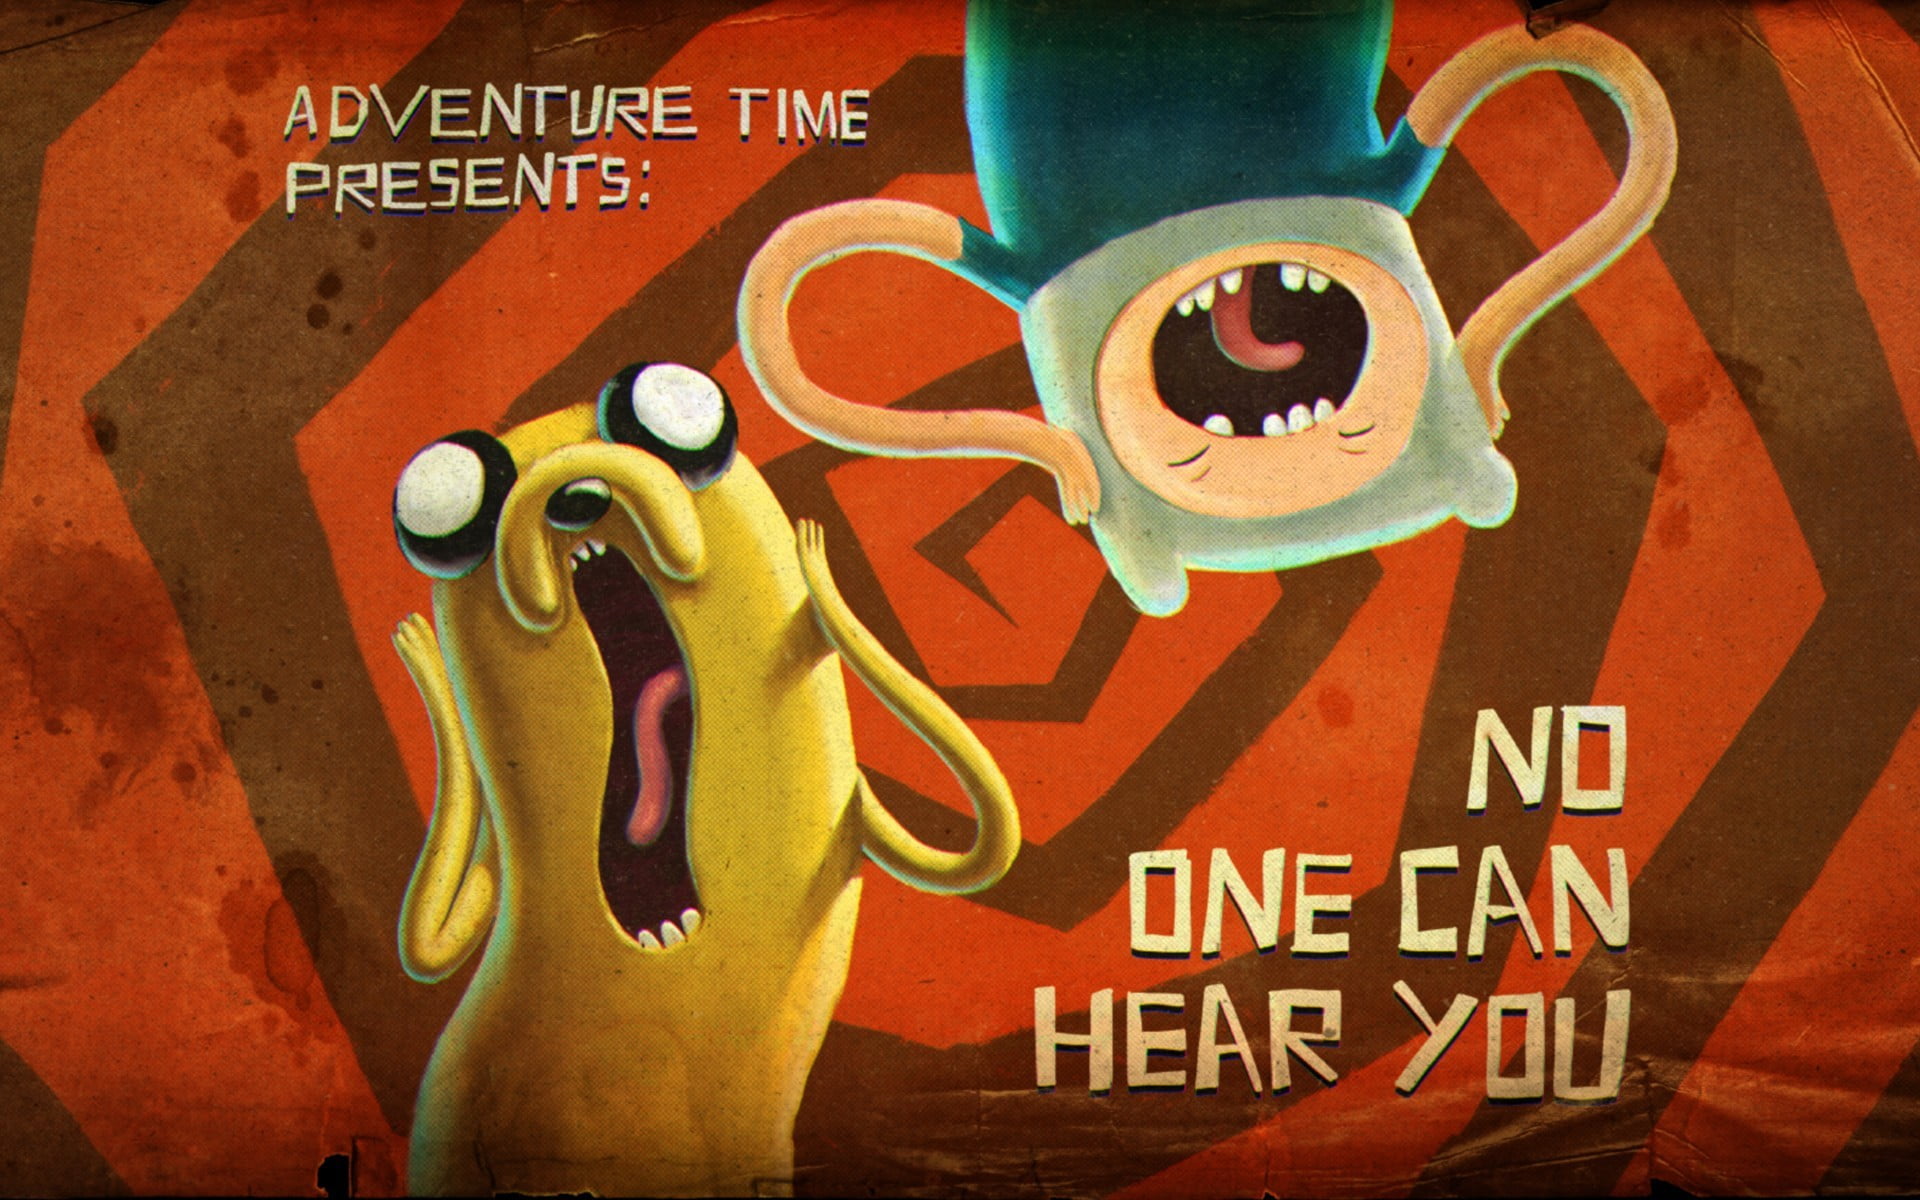 Adventure Time Present: No one Can hear you postr, Adventure Time, Finn the Human, Jake the Dog